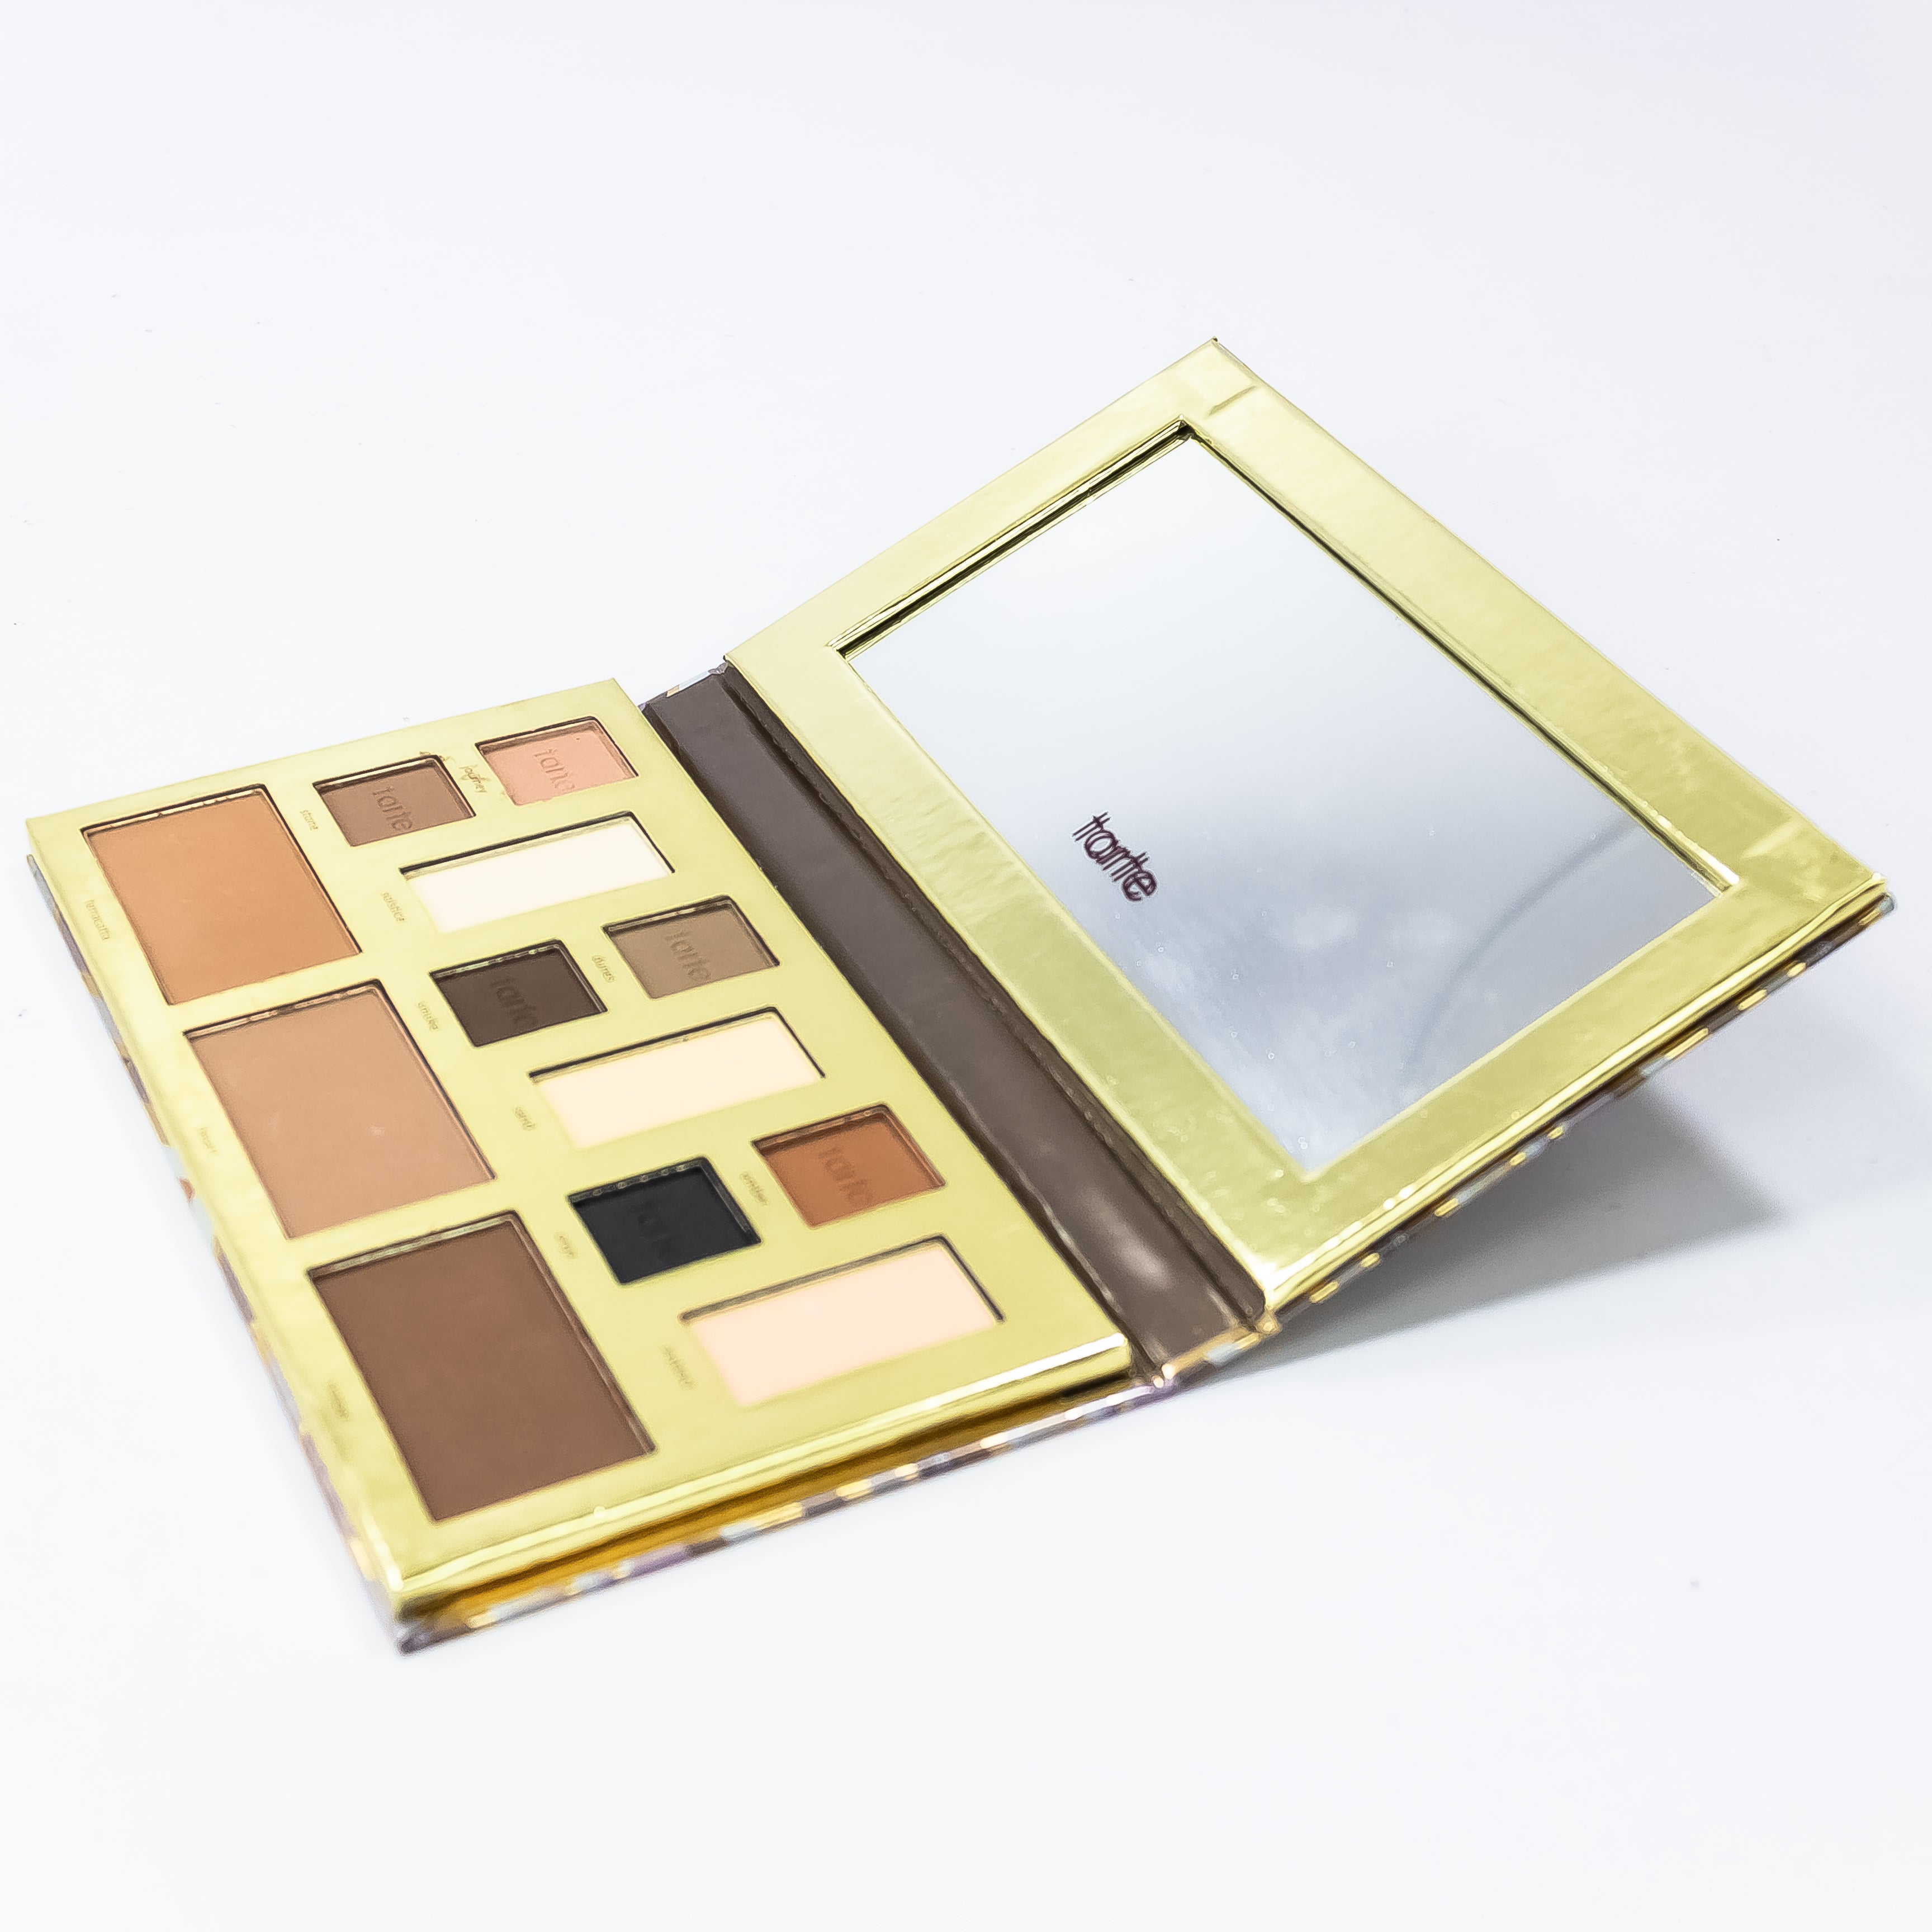 TARTE HIGH PERFORMANCE NATURALS FACE SHAPING PALETTE